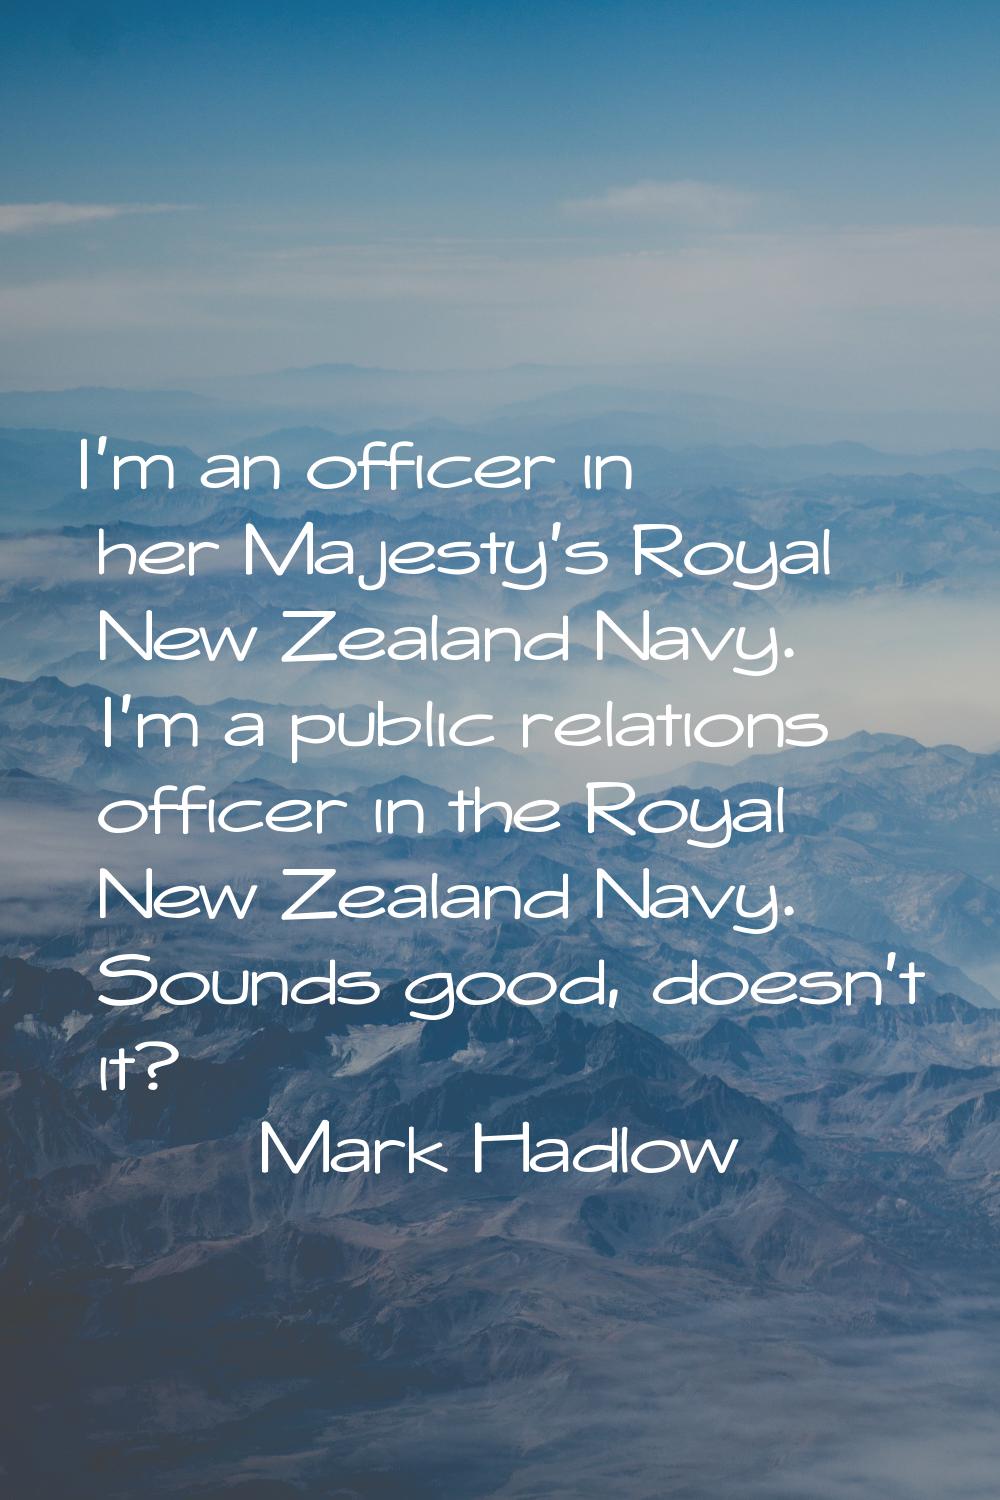 I'm an officer in her Majesty's Royal New Zealand Navy. I'm a public relations officer in the Royal